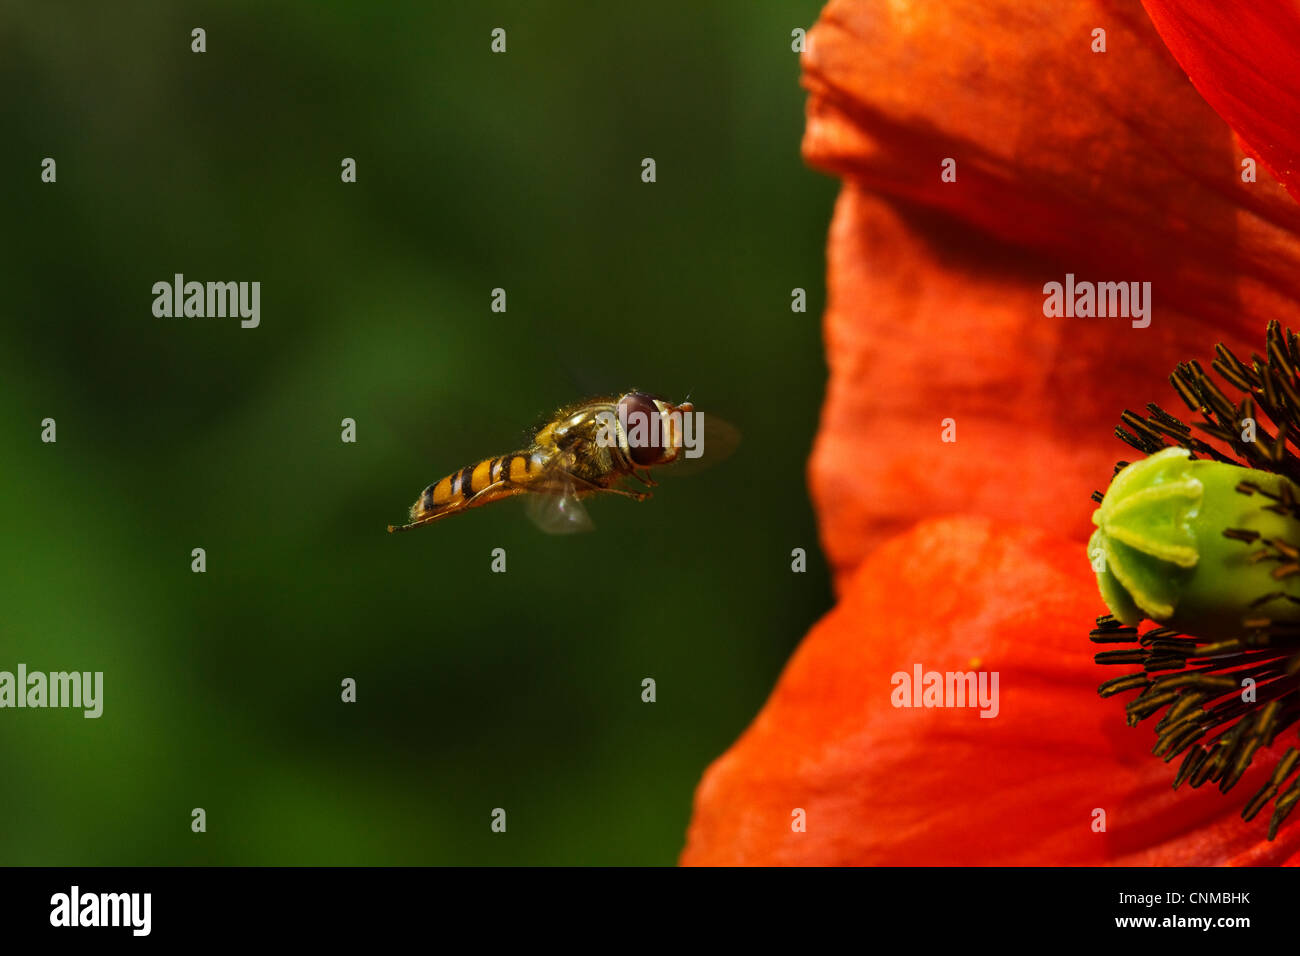 Hover fly entering a poppy Stock Photo